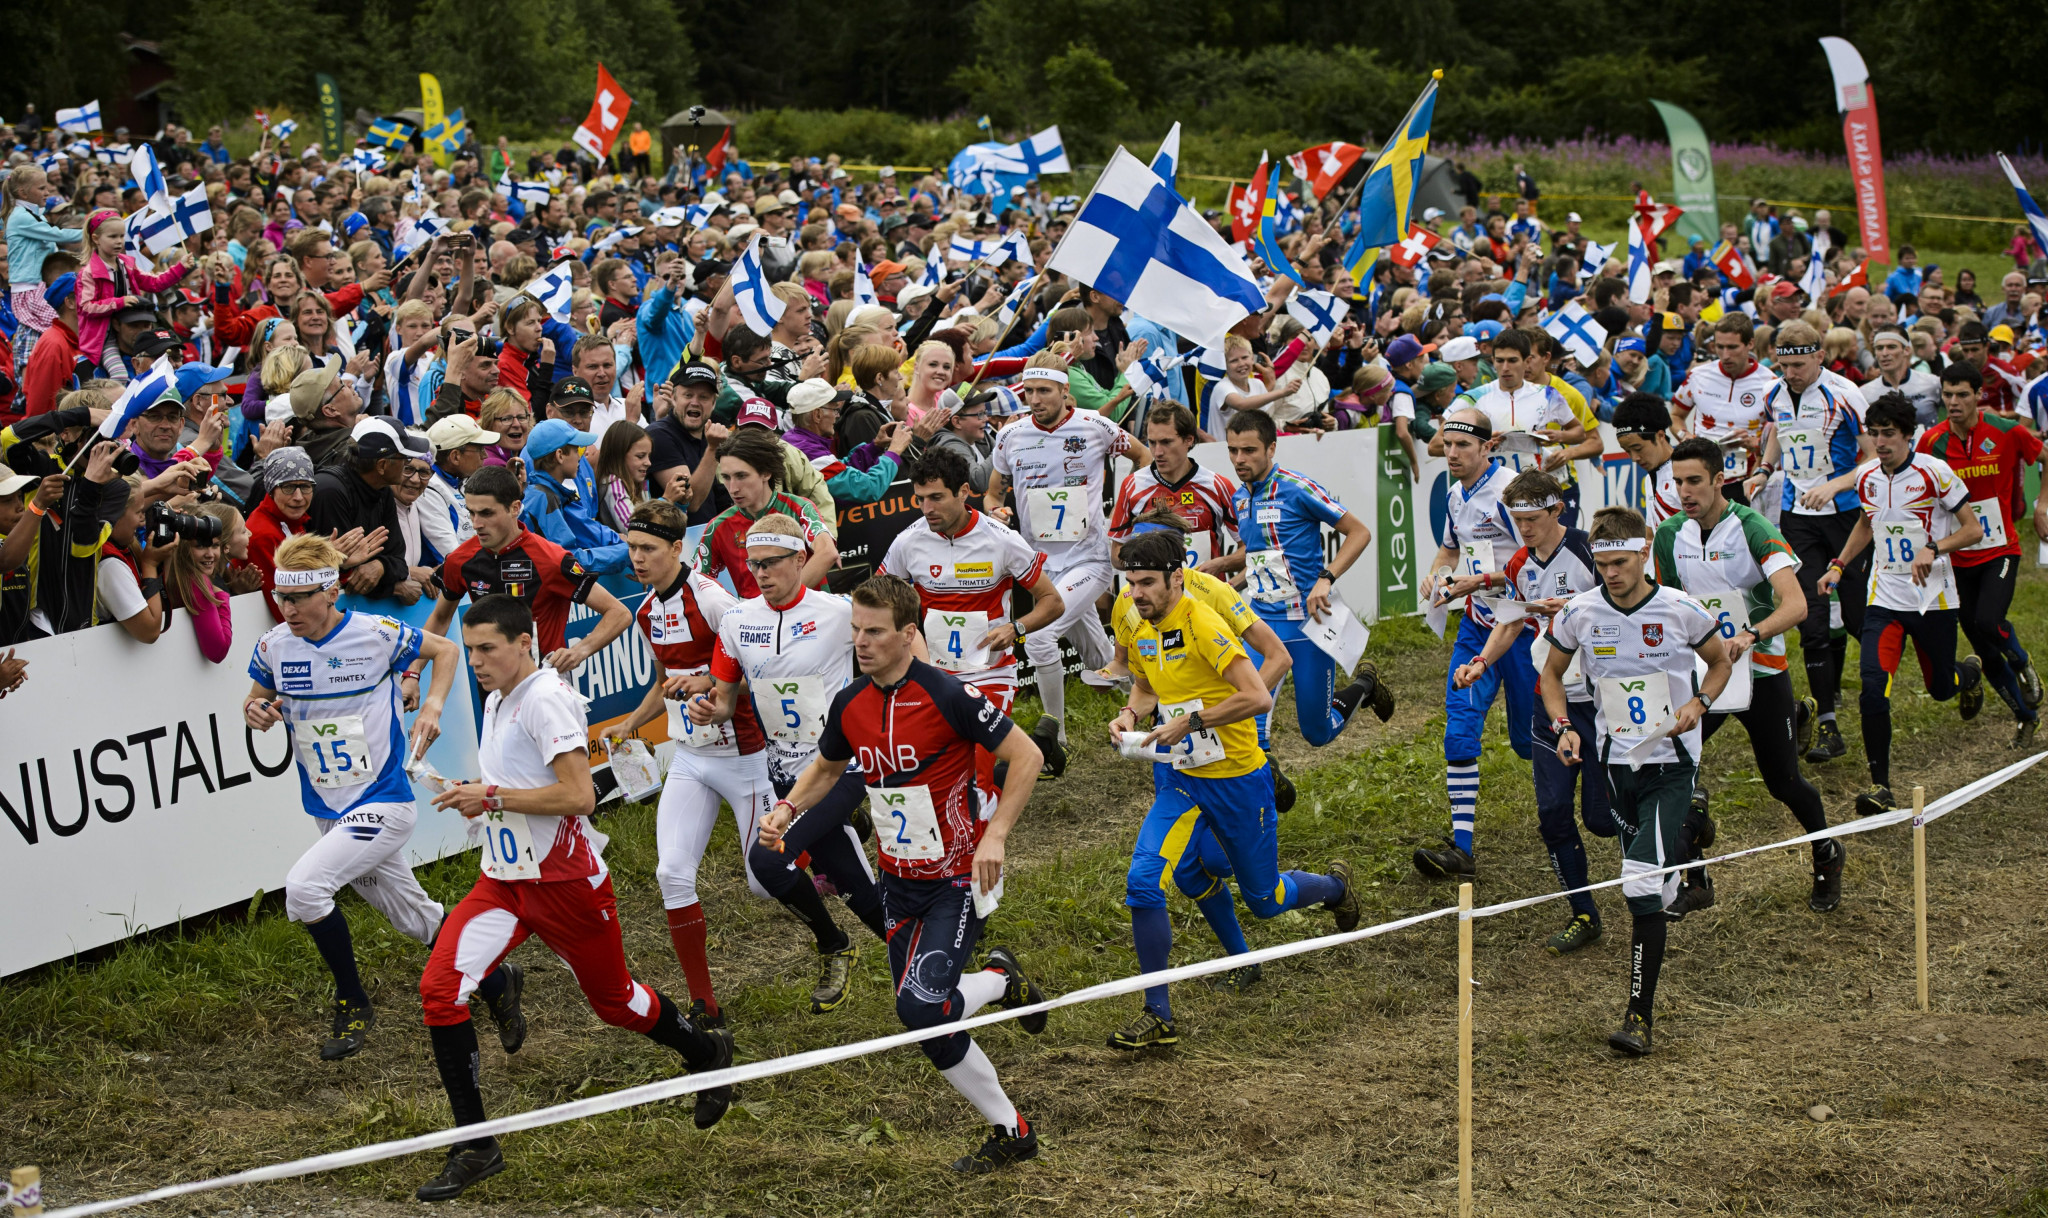 Orienteering world ranking events can resume from August 1 ©Getty Images